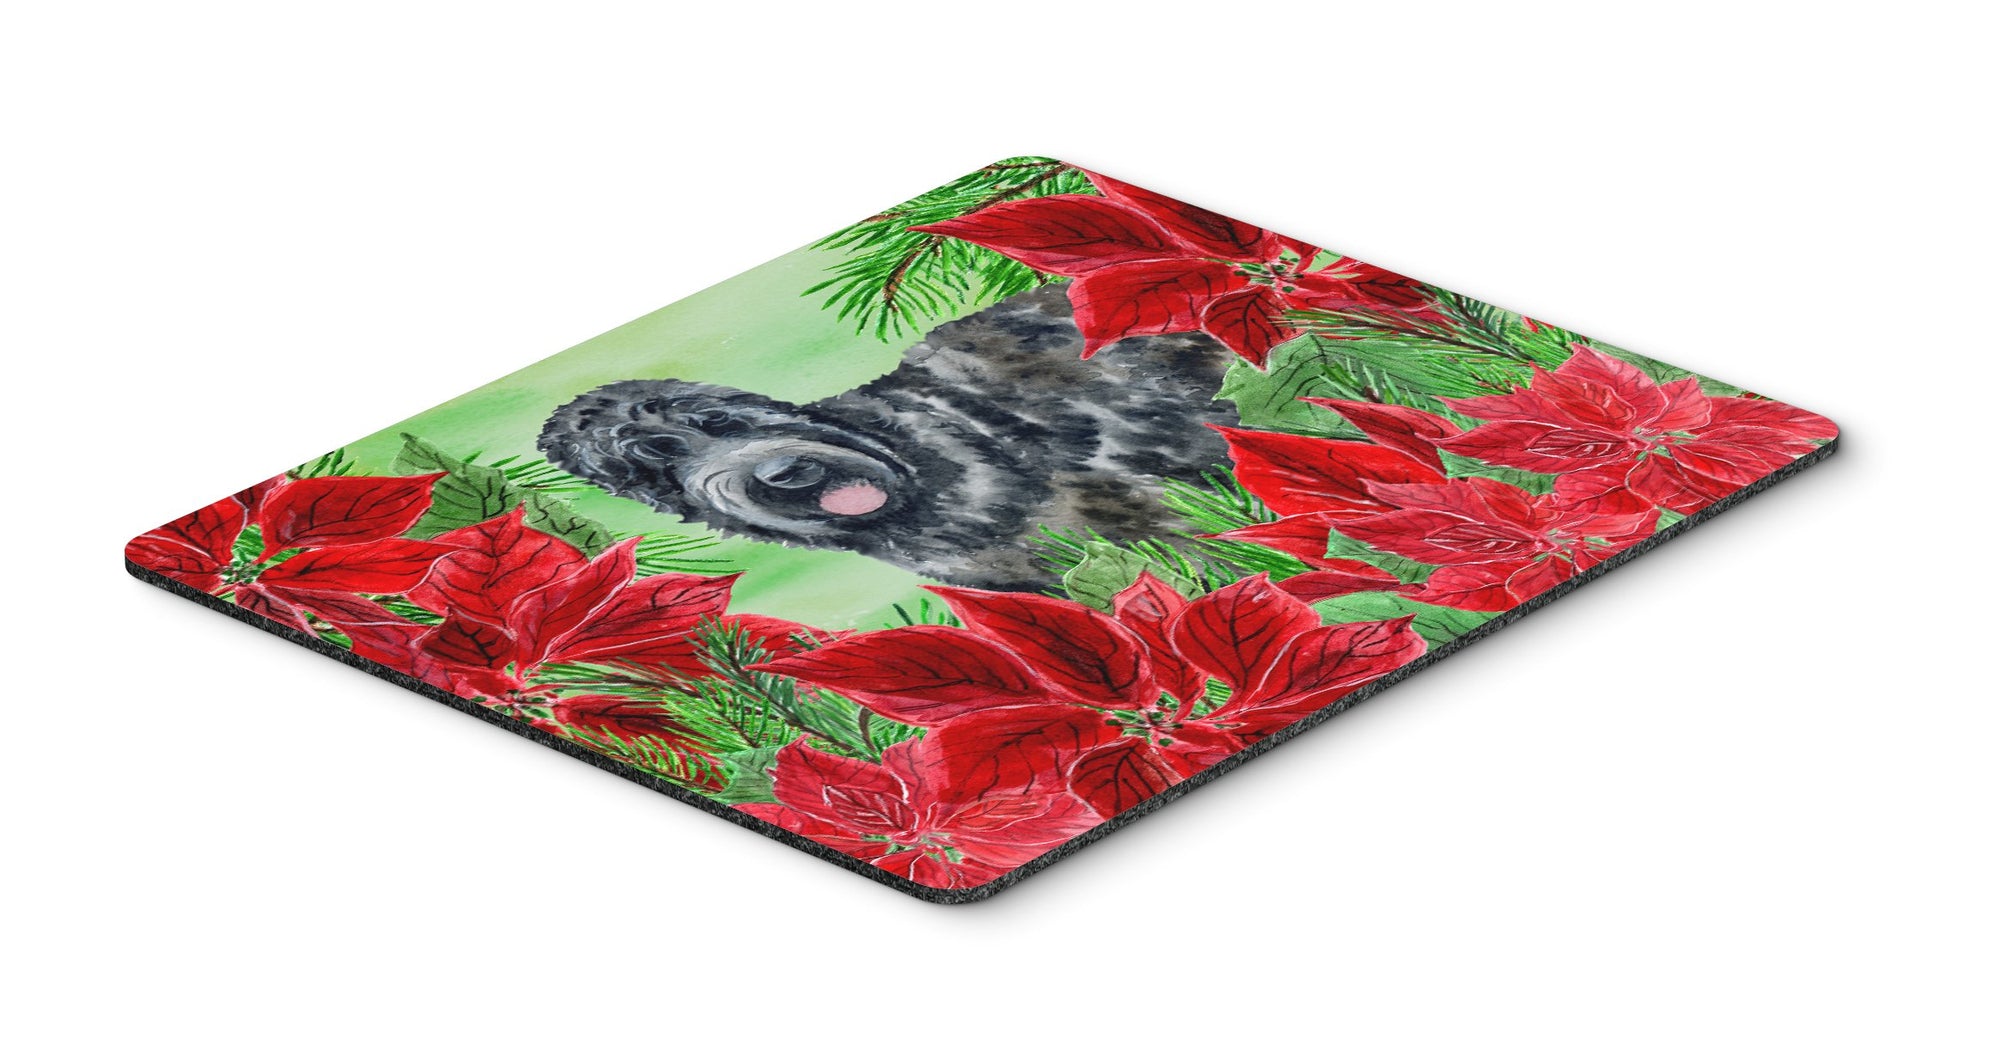 Black Russian Terrier Poinsettas Mouse Pad, Hot Pad or Trivet CK1325MP by Caroline's Treasures